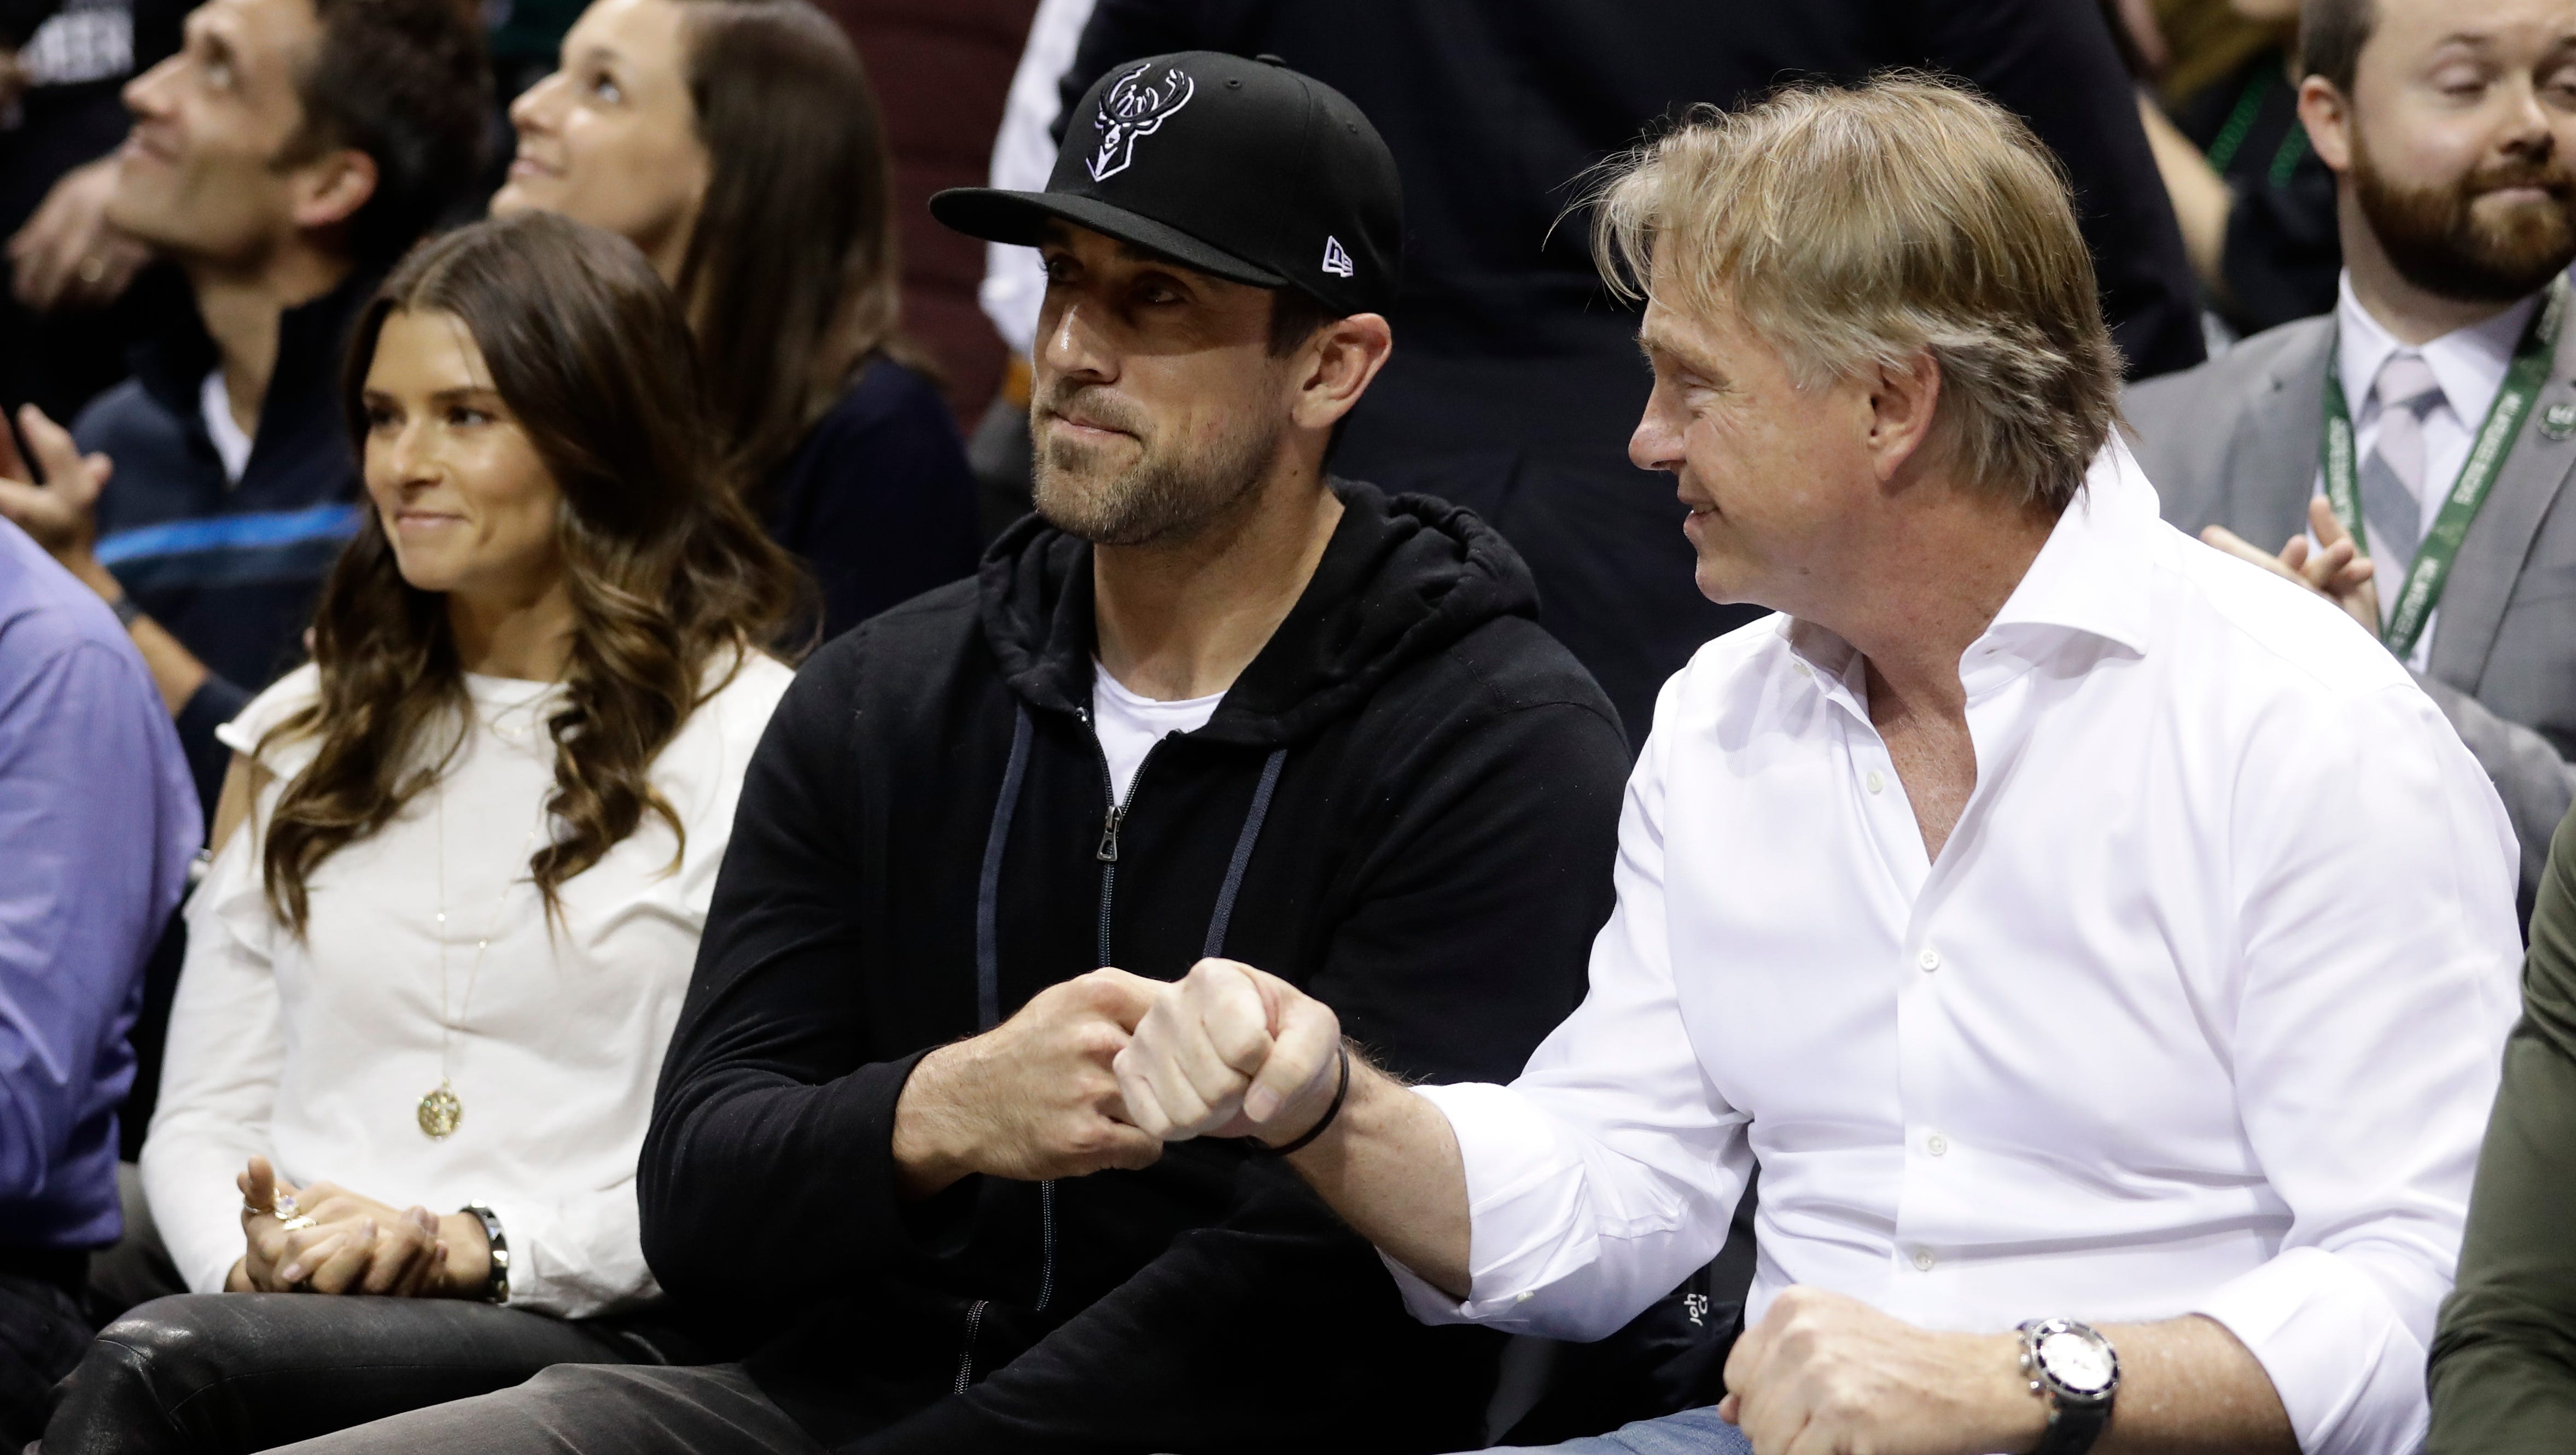 Aaron Rodgers and Wes Edens do a fist bump during Game 3 of the Bucks-Celtics playoff game, where it was announced that Rodgers had joined the Bucks' ownership group. Race car driver, Danica Patrick, looks on during the game.